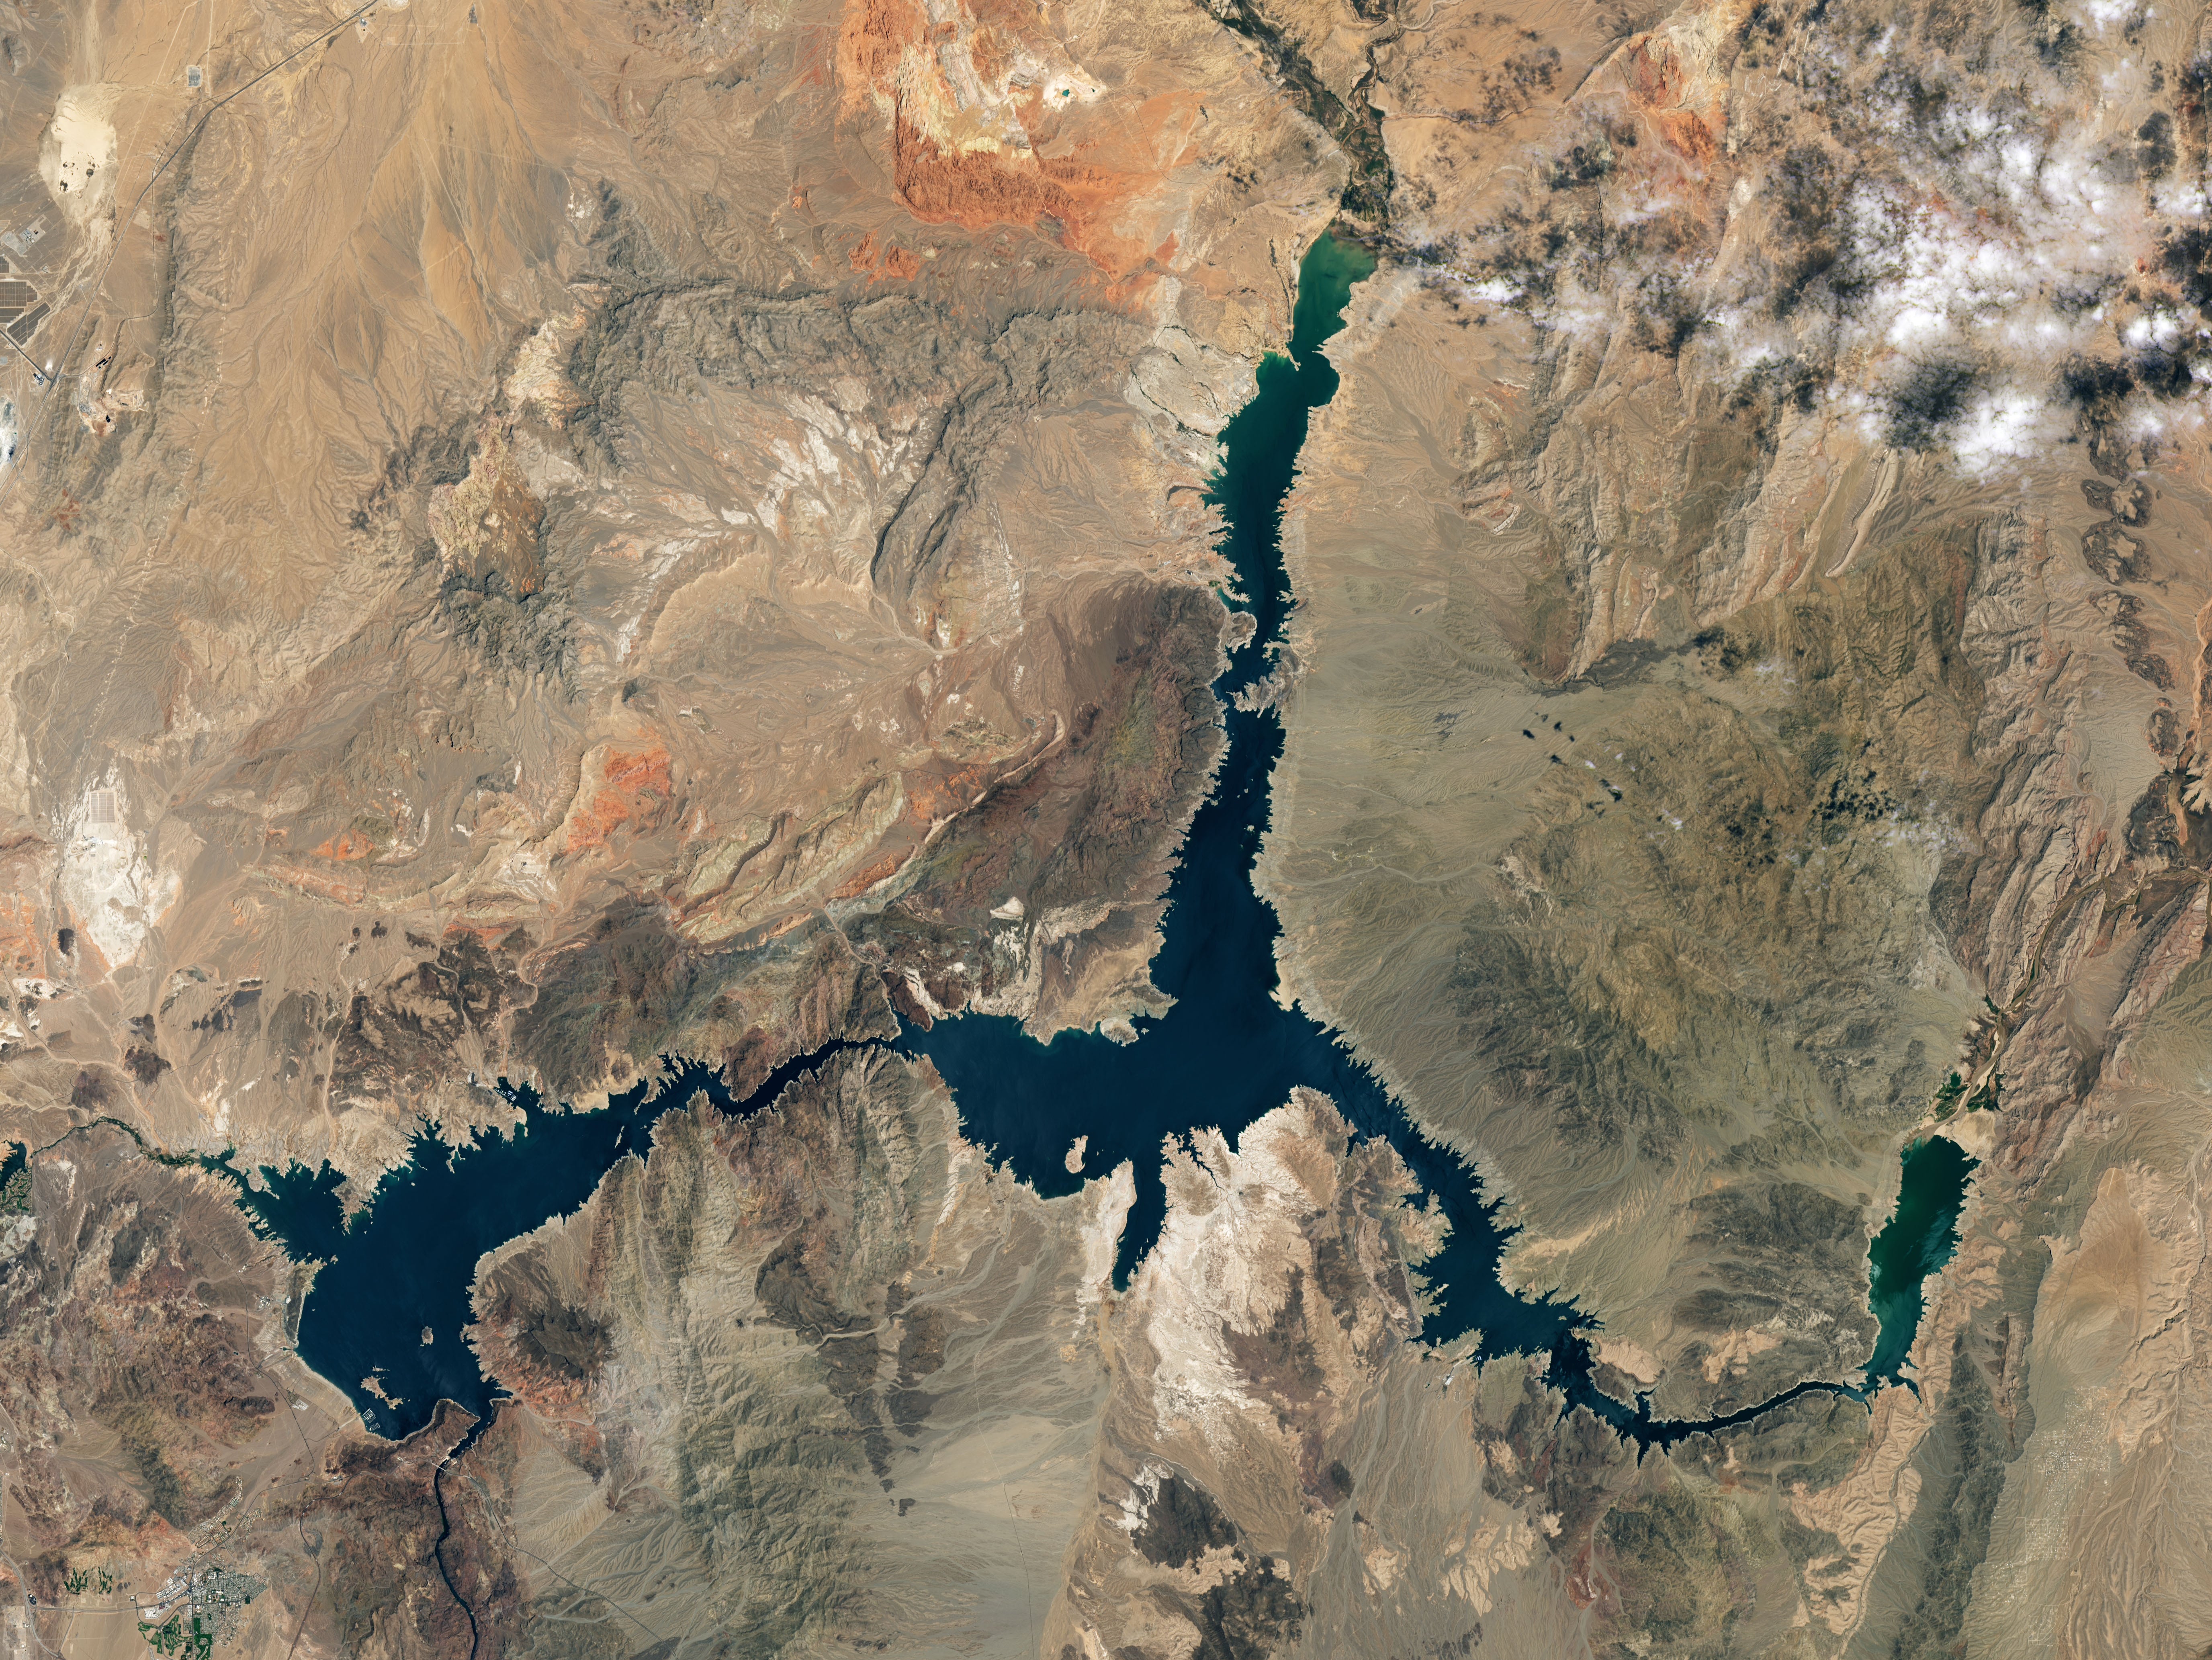 A NASA image of Lake Mead in 2020